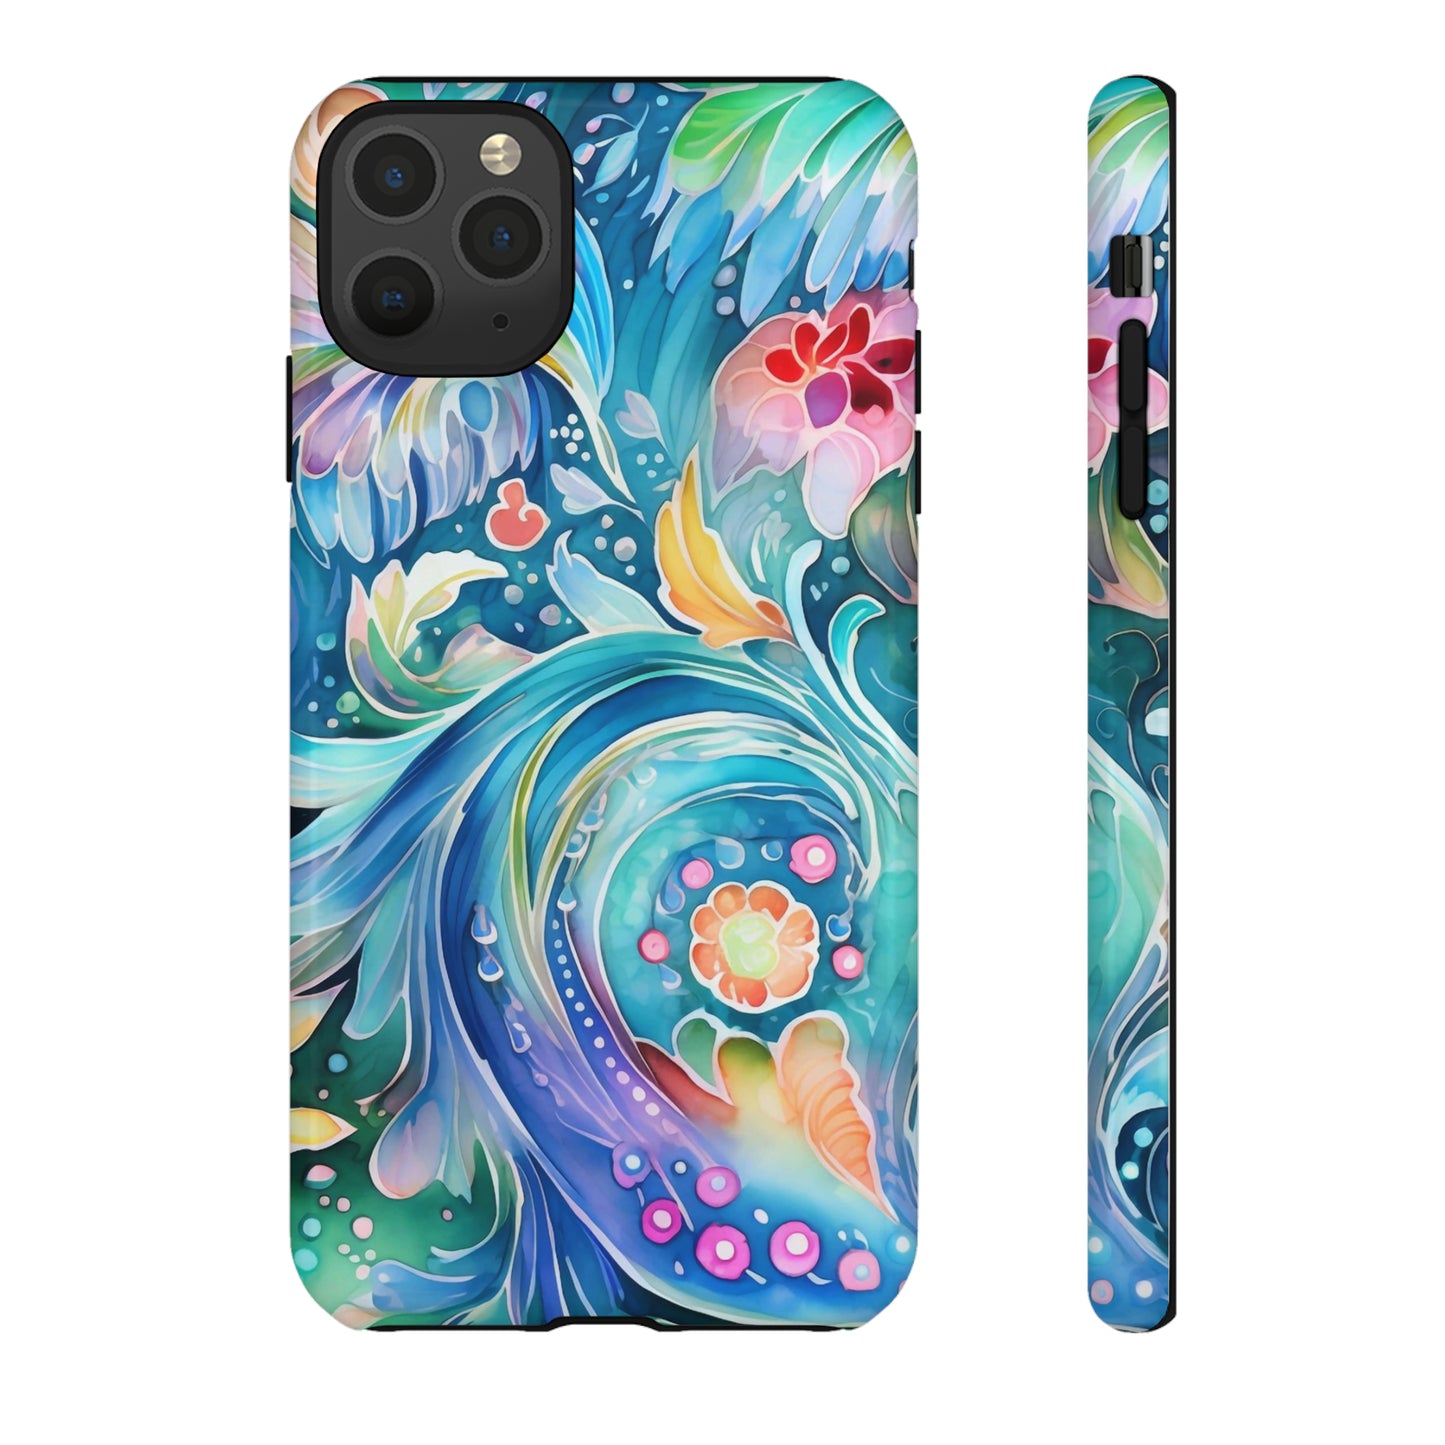 IPhone Cases, Colorful Floran and Swirl IPhone Cases